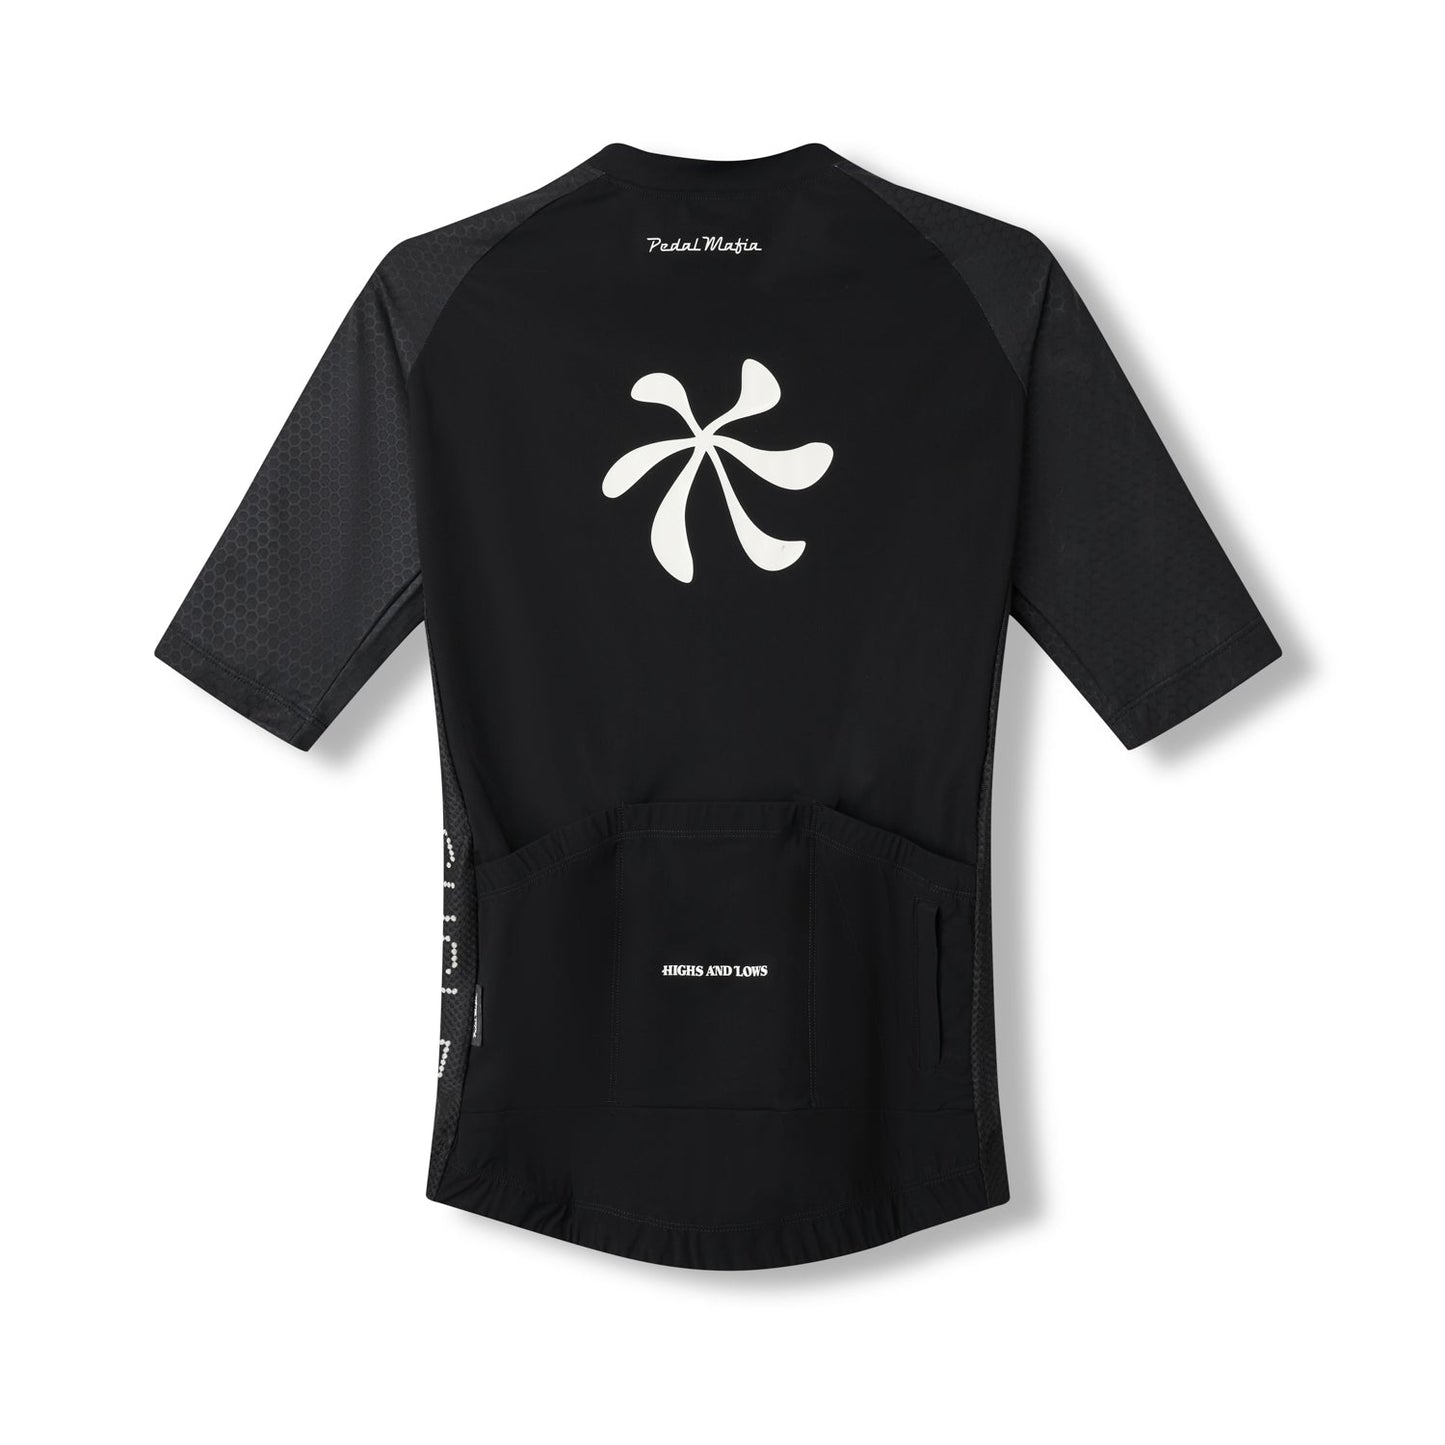 Mens Pro Jersey - Life Cycle Black